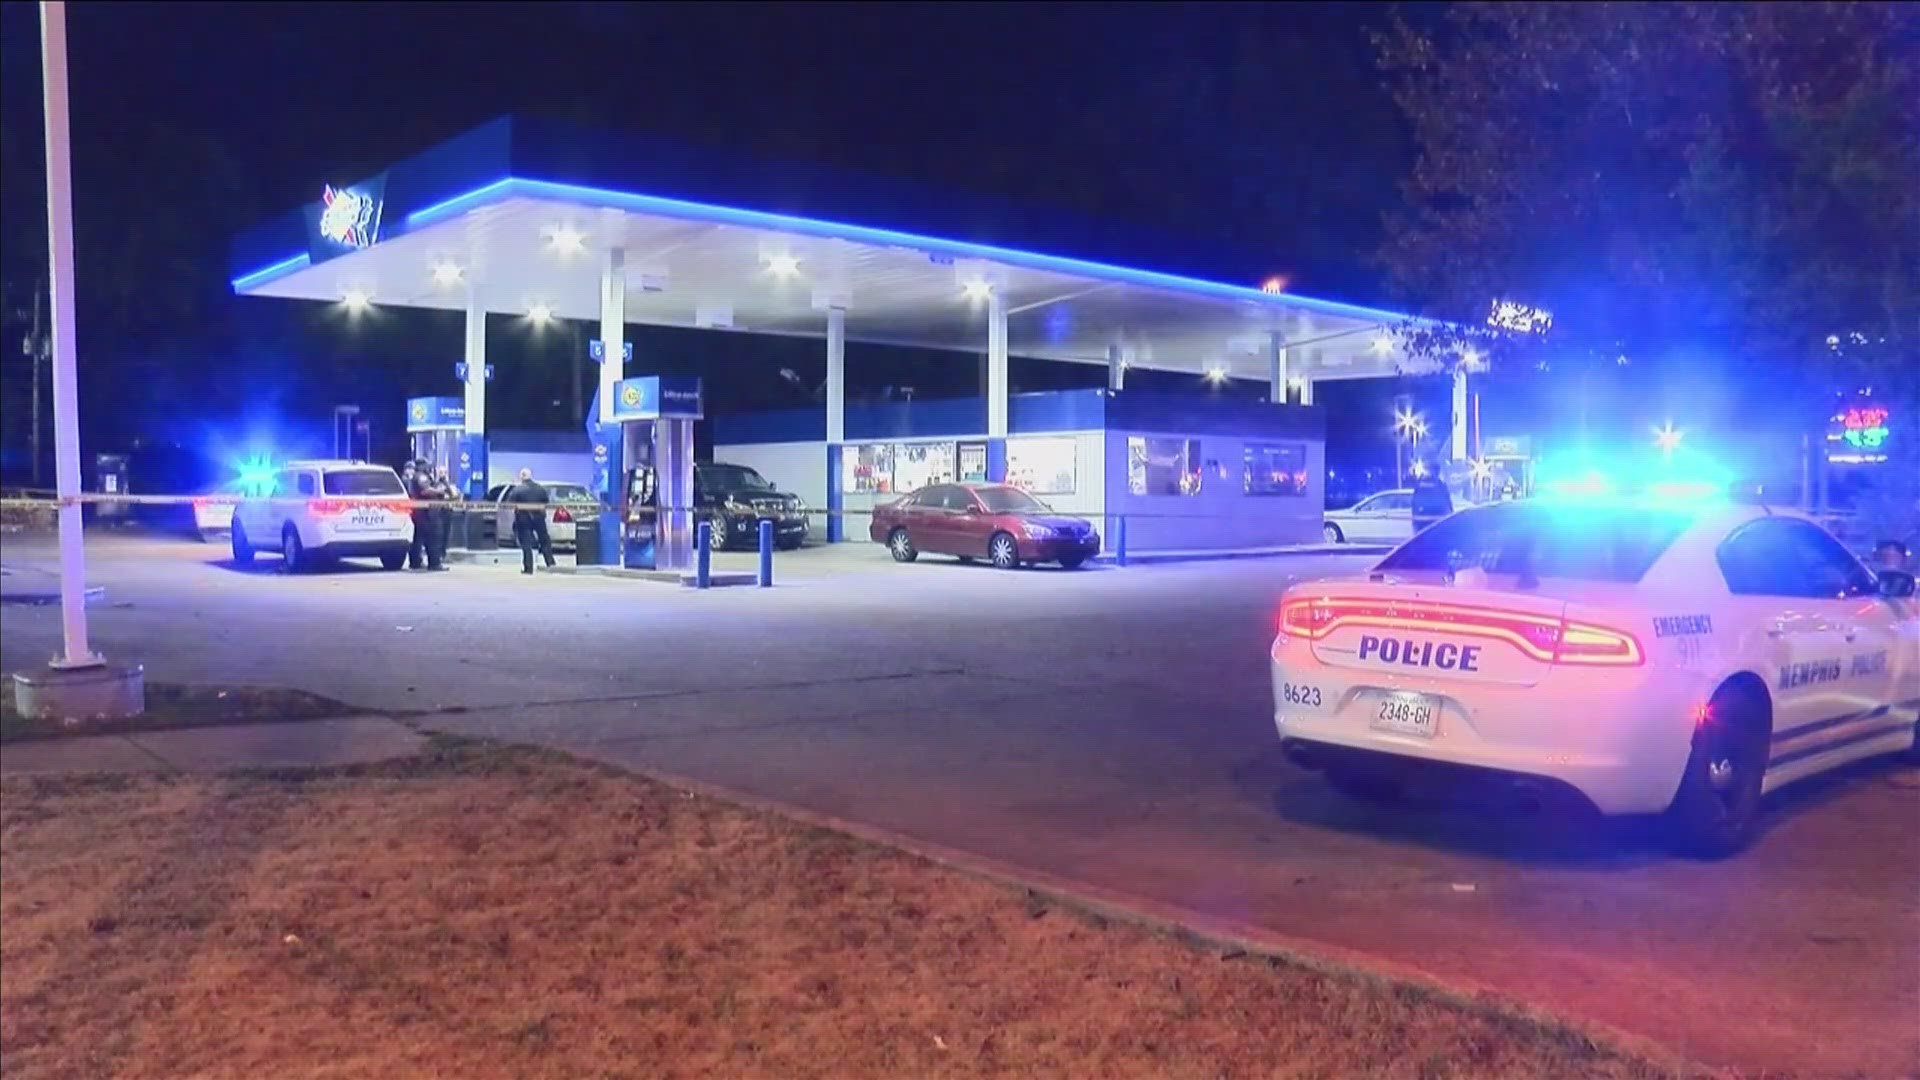 Memphis Police responded to the shooting around 4 a.m. Wednesday on Sycamore View at a Sunoco gas station.